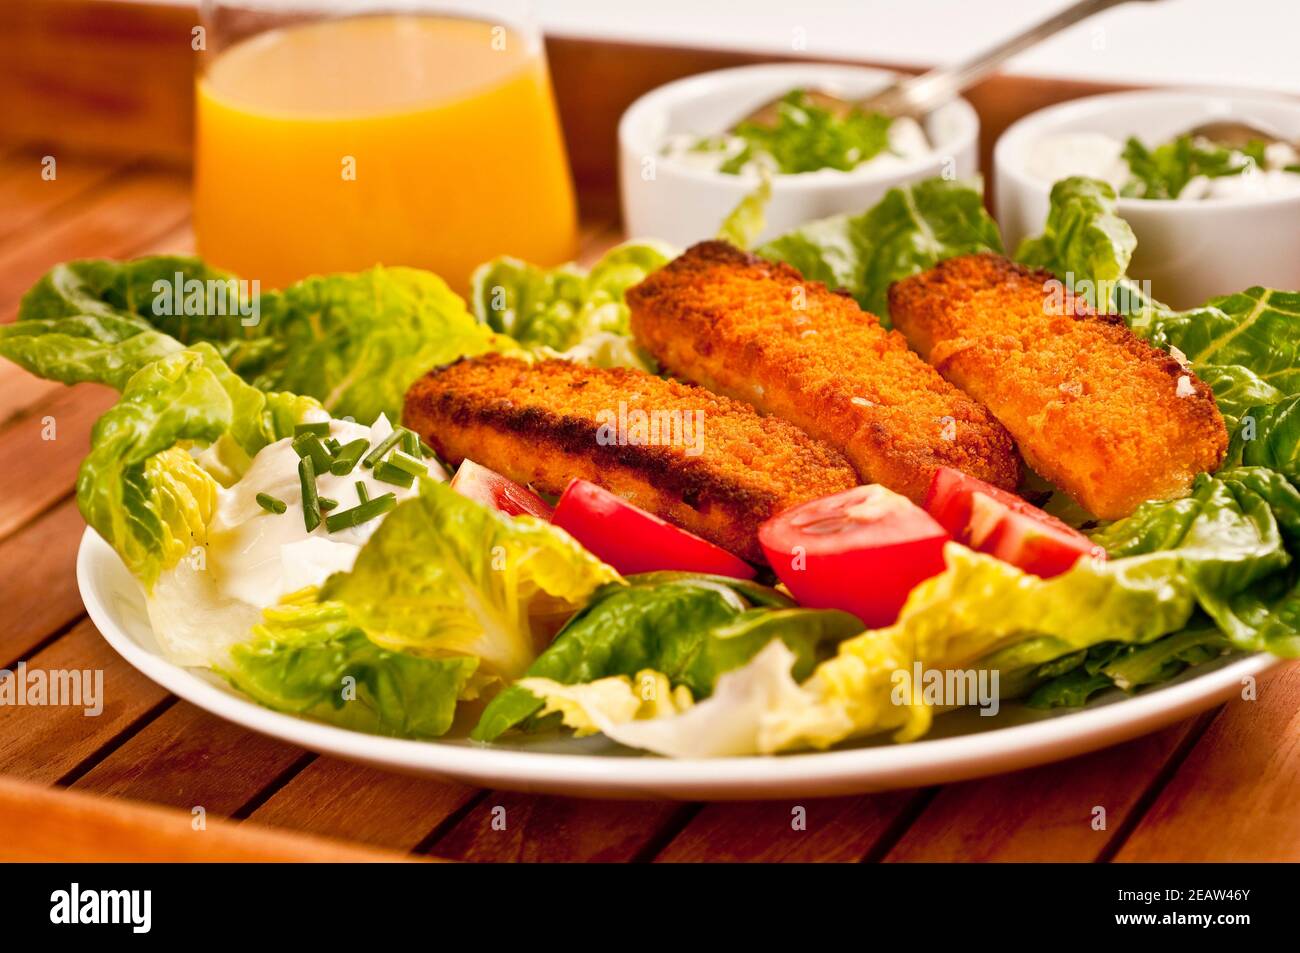 Fish fingers served with salad Stock Photo